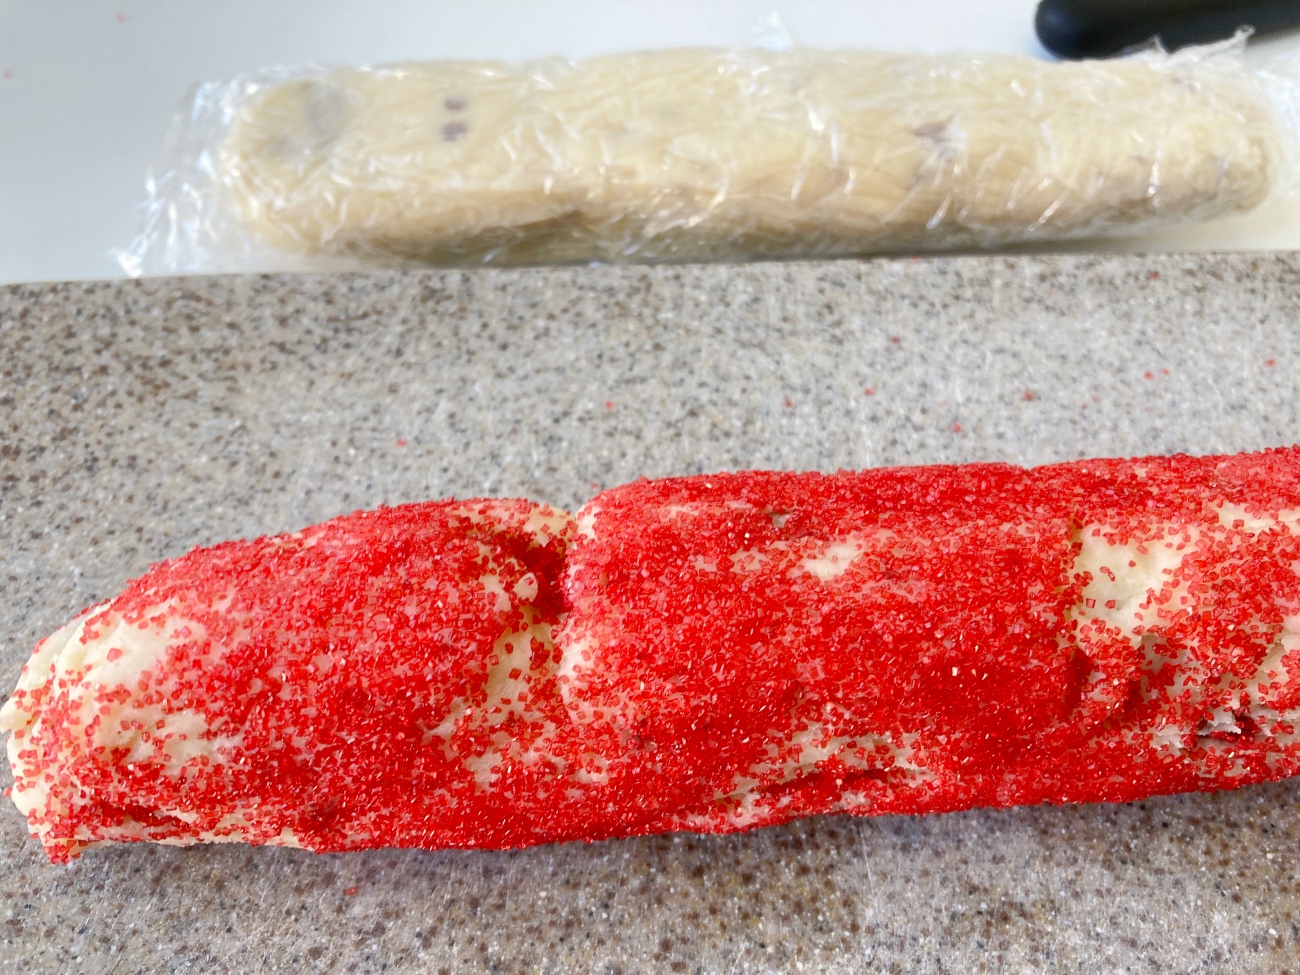 Preheat oven to 325˚F. Place red crystals on a plate or tray, and green sugar on a separate plate. Roll 2 logs in red sugar and remaining logs in green sugar. Using a very sharp knife cut each log into slices 1/4